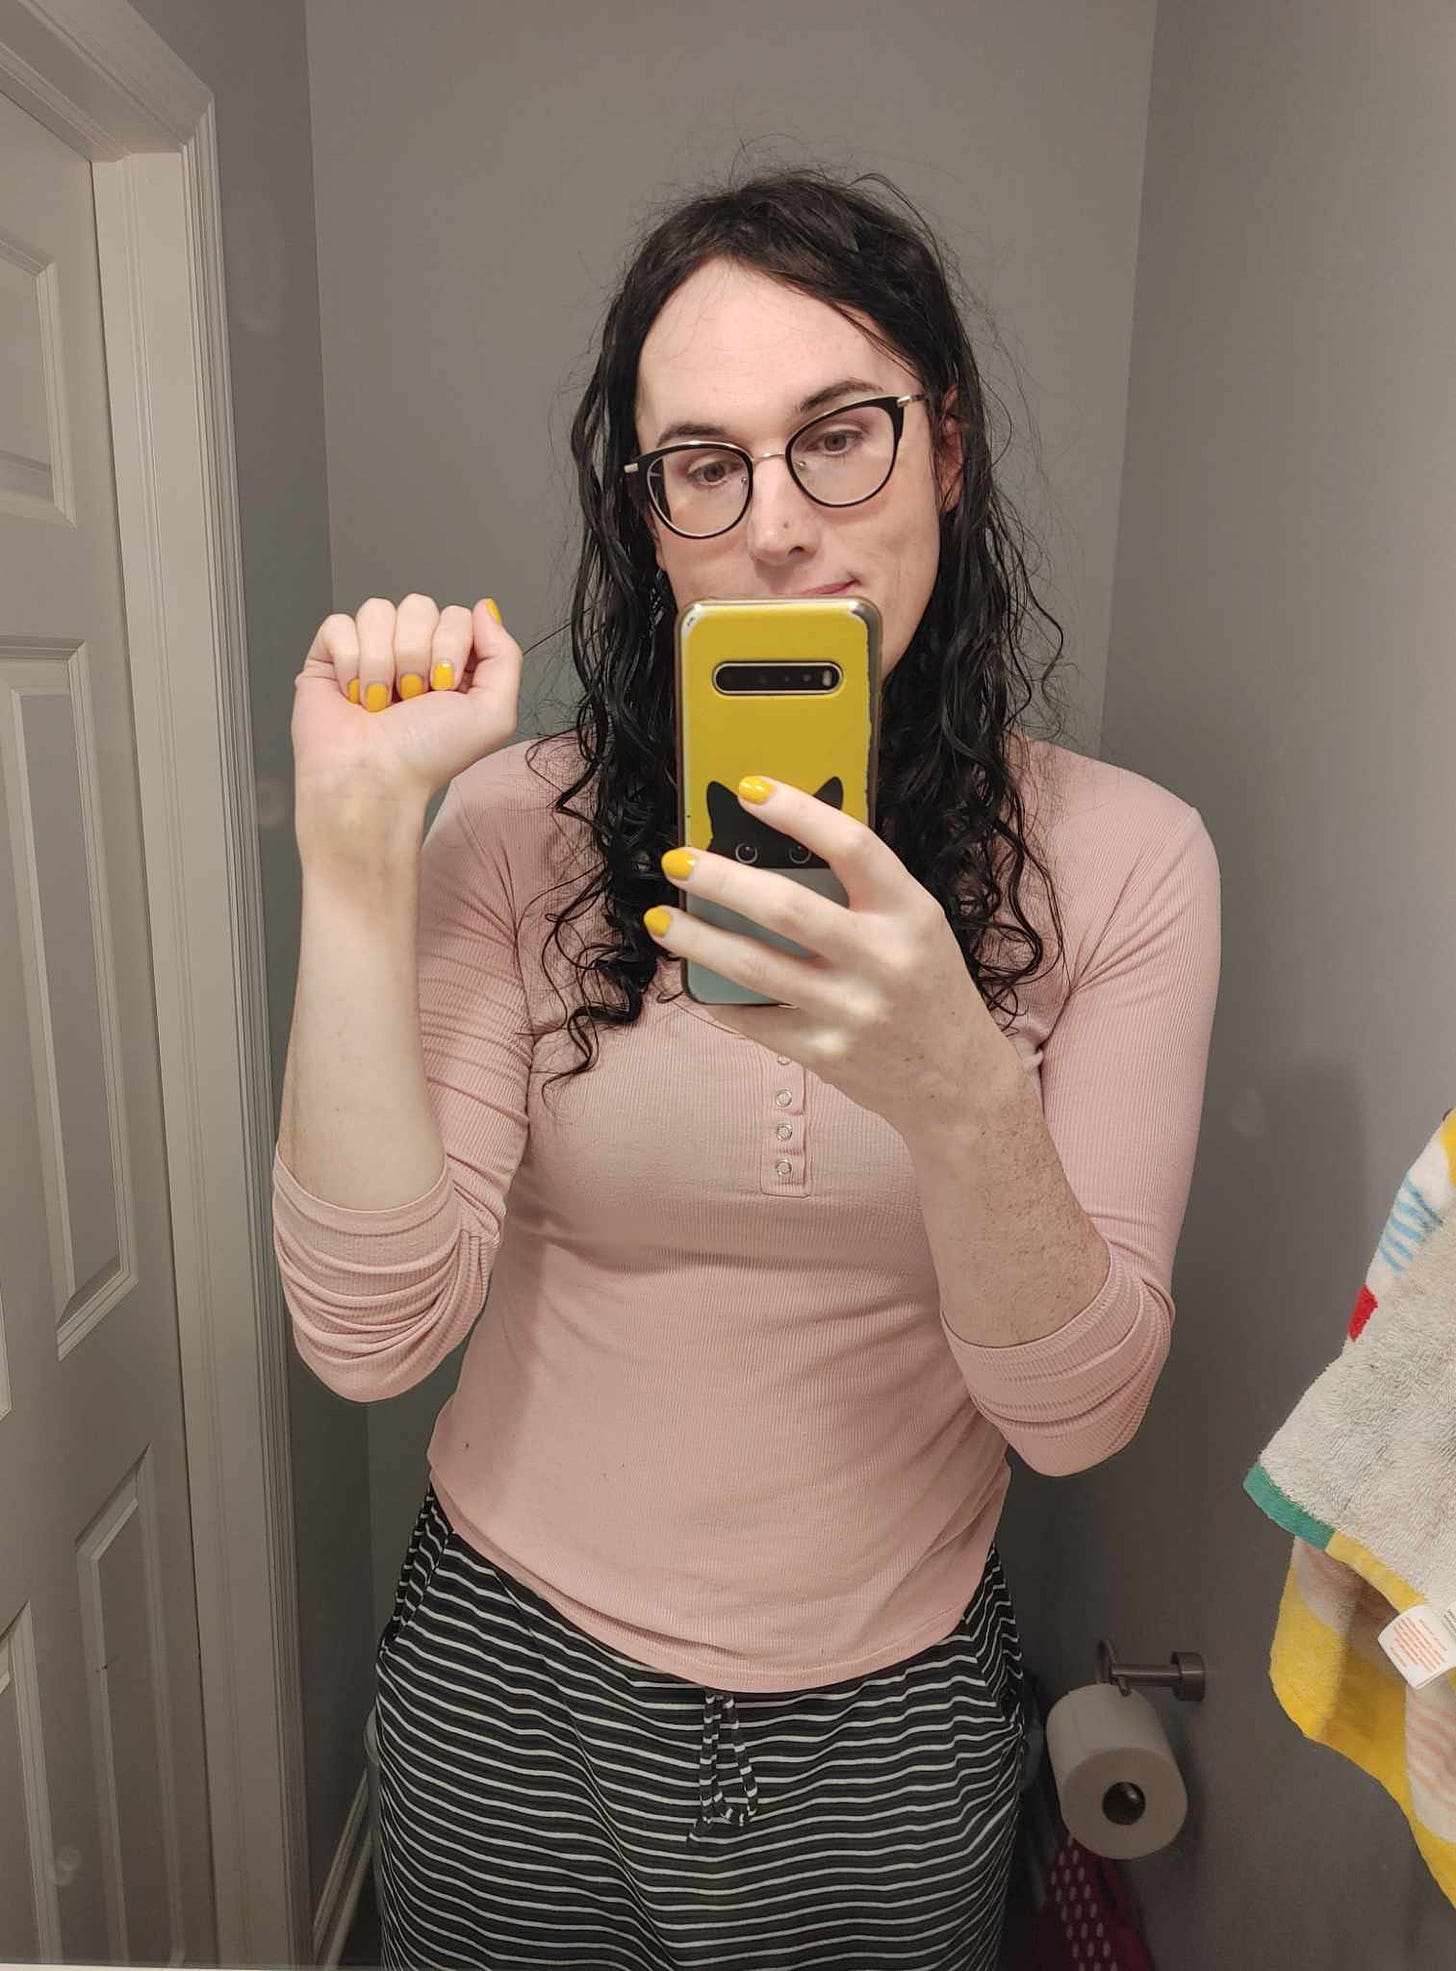 A mirror selfie of me, a pale white woman with wavy, chest-length black hair and horned glasses, holding up my right arm to show my bare wrist with a good 3-inch long bruise